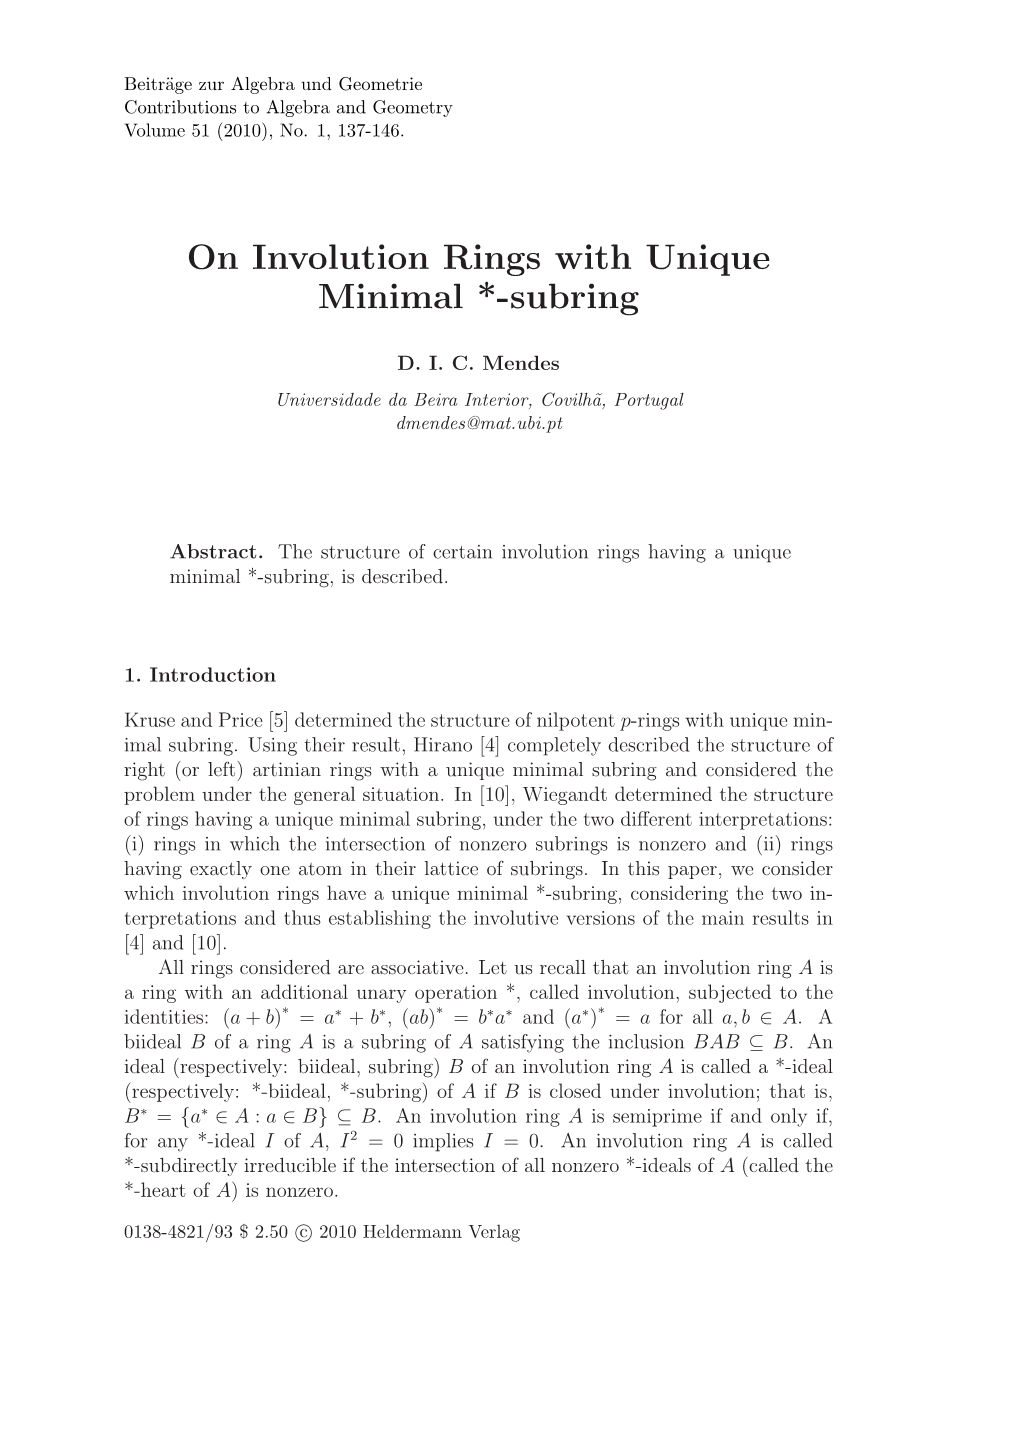 On Involution Rings with Unique Minimal *-Subring